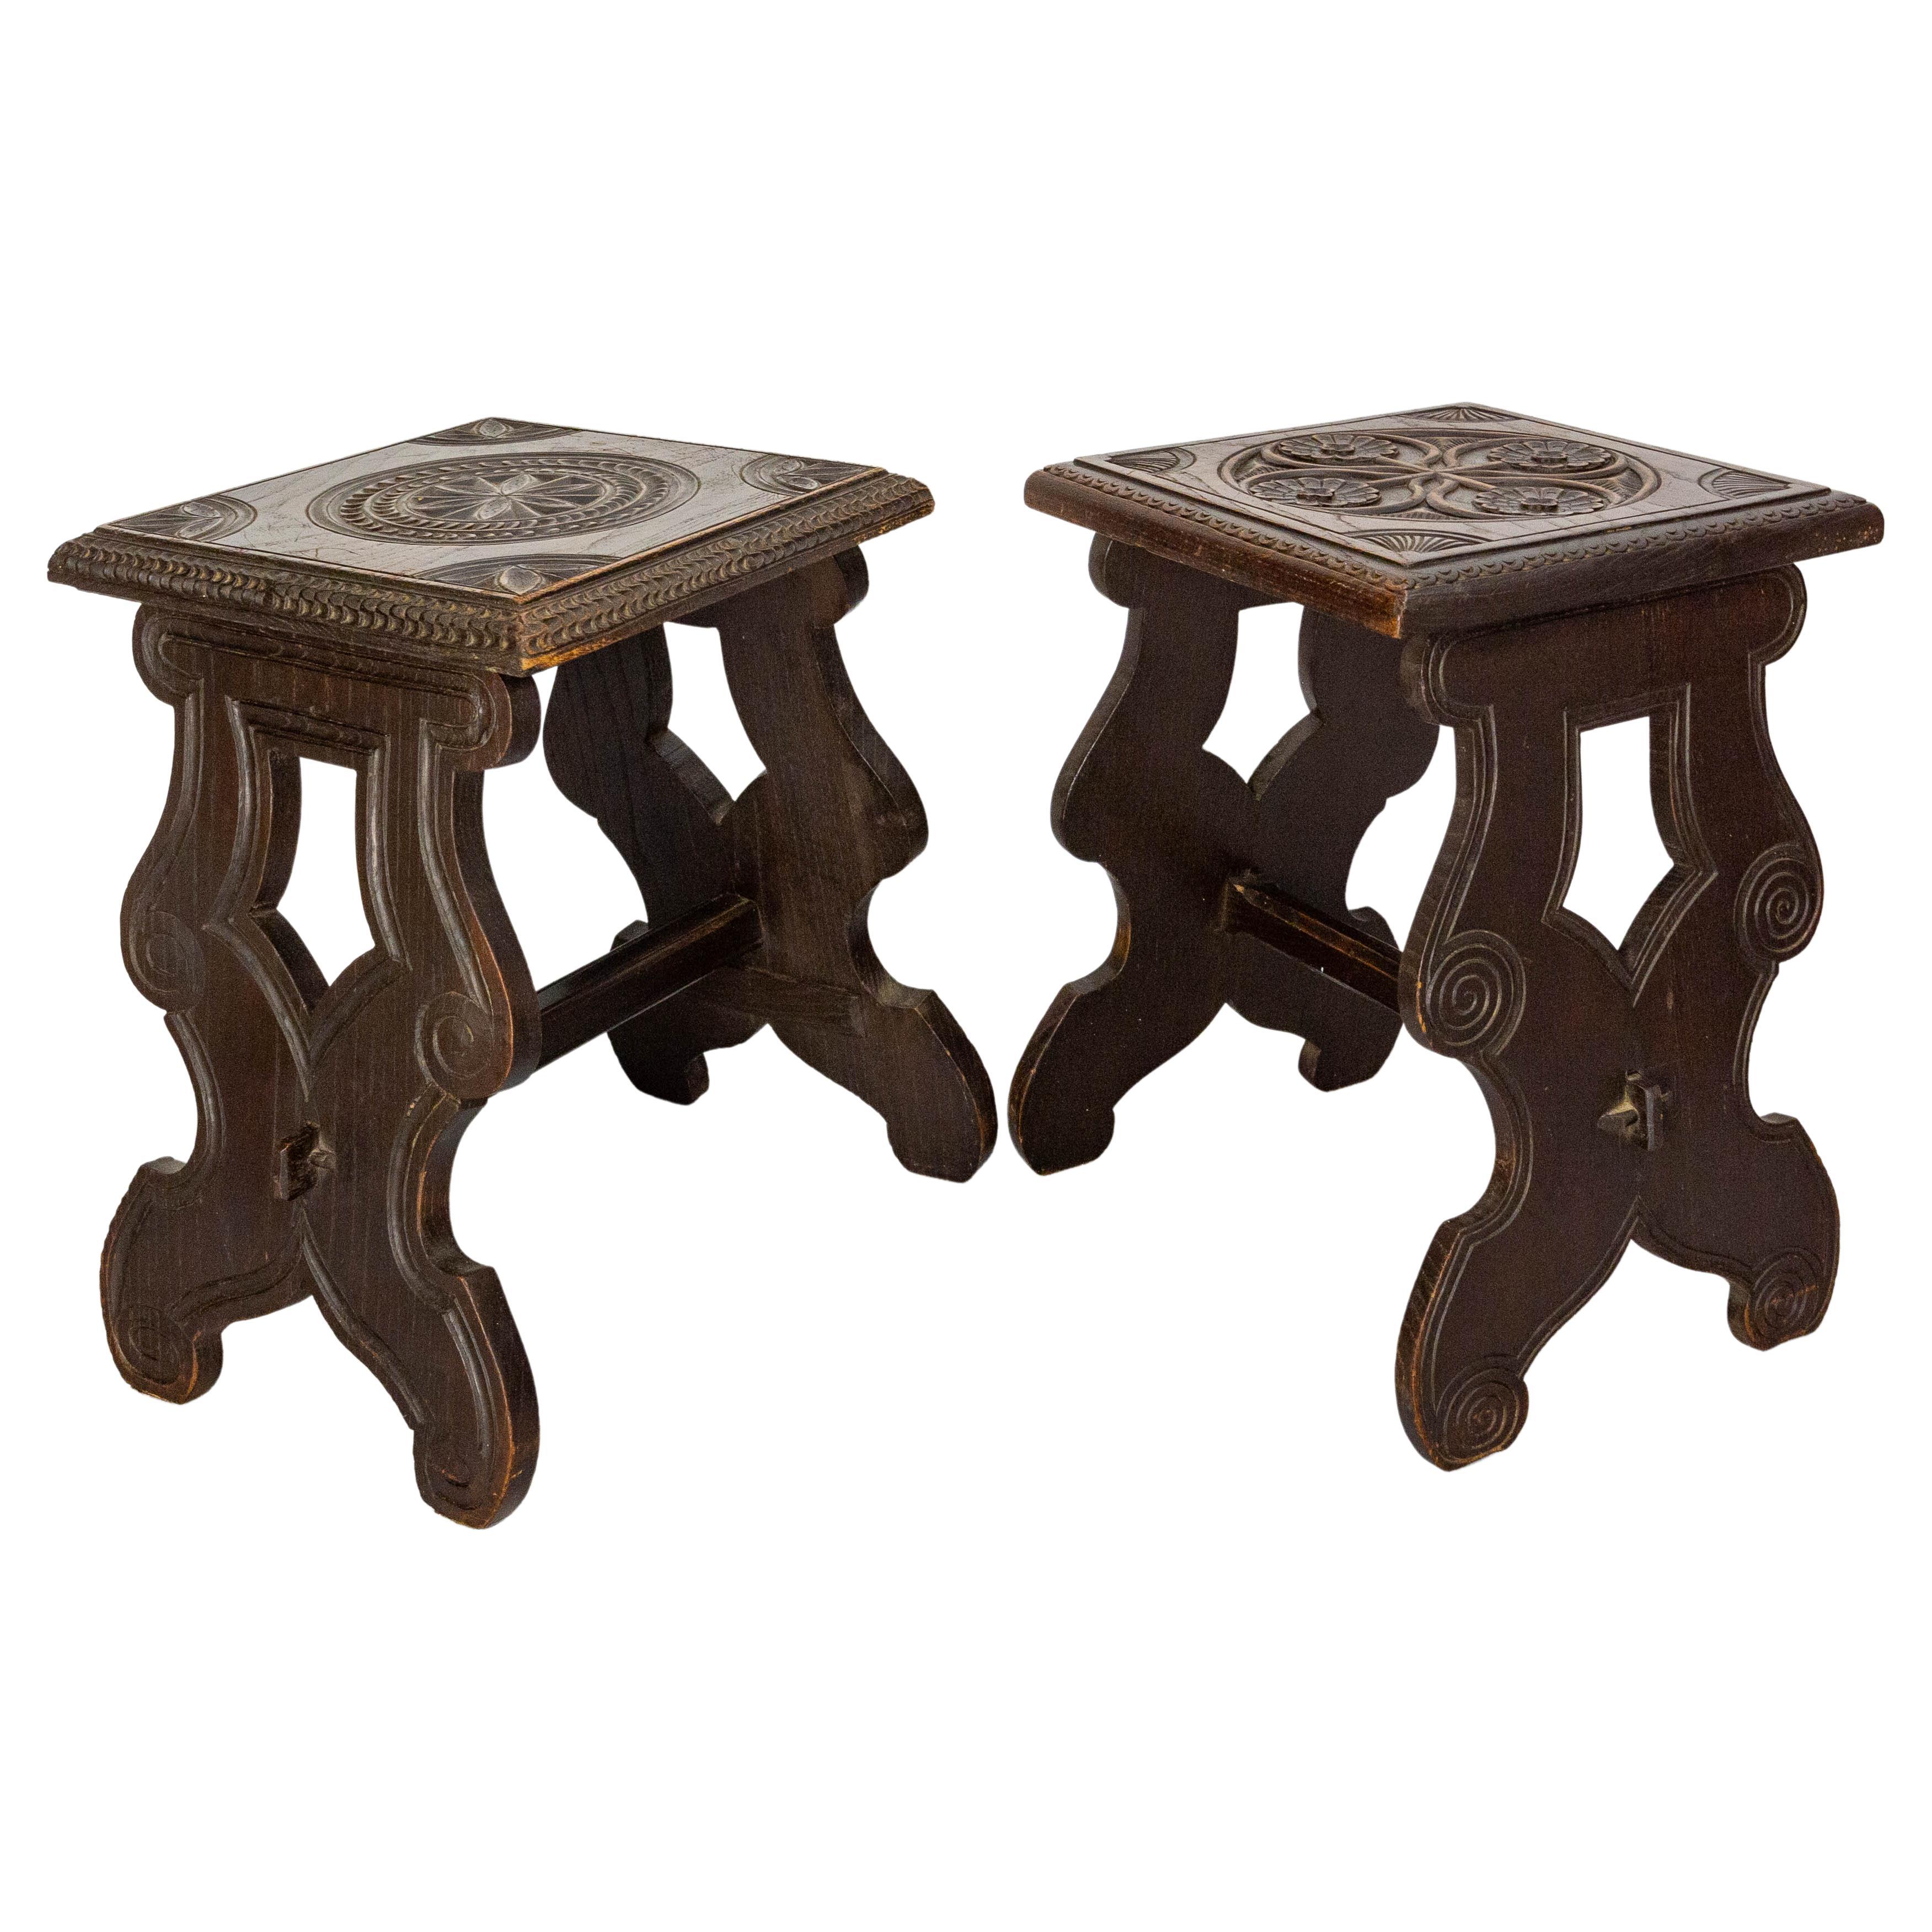 French Massive Chestnut Pair of Stools from Britanny, Late 19th Century For Sale